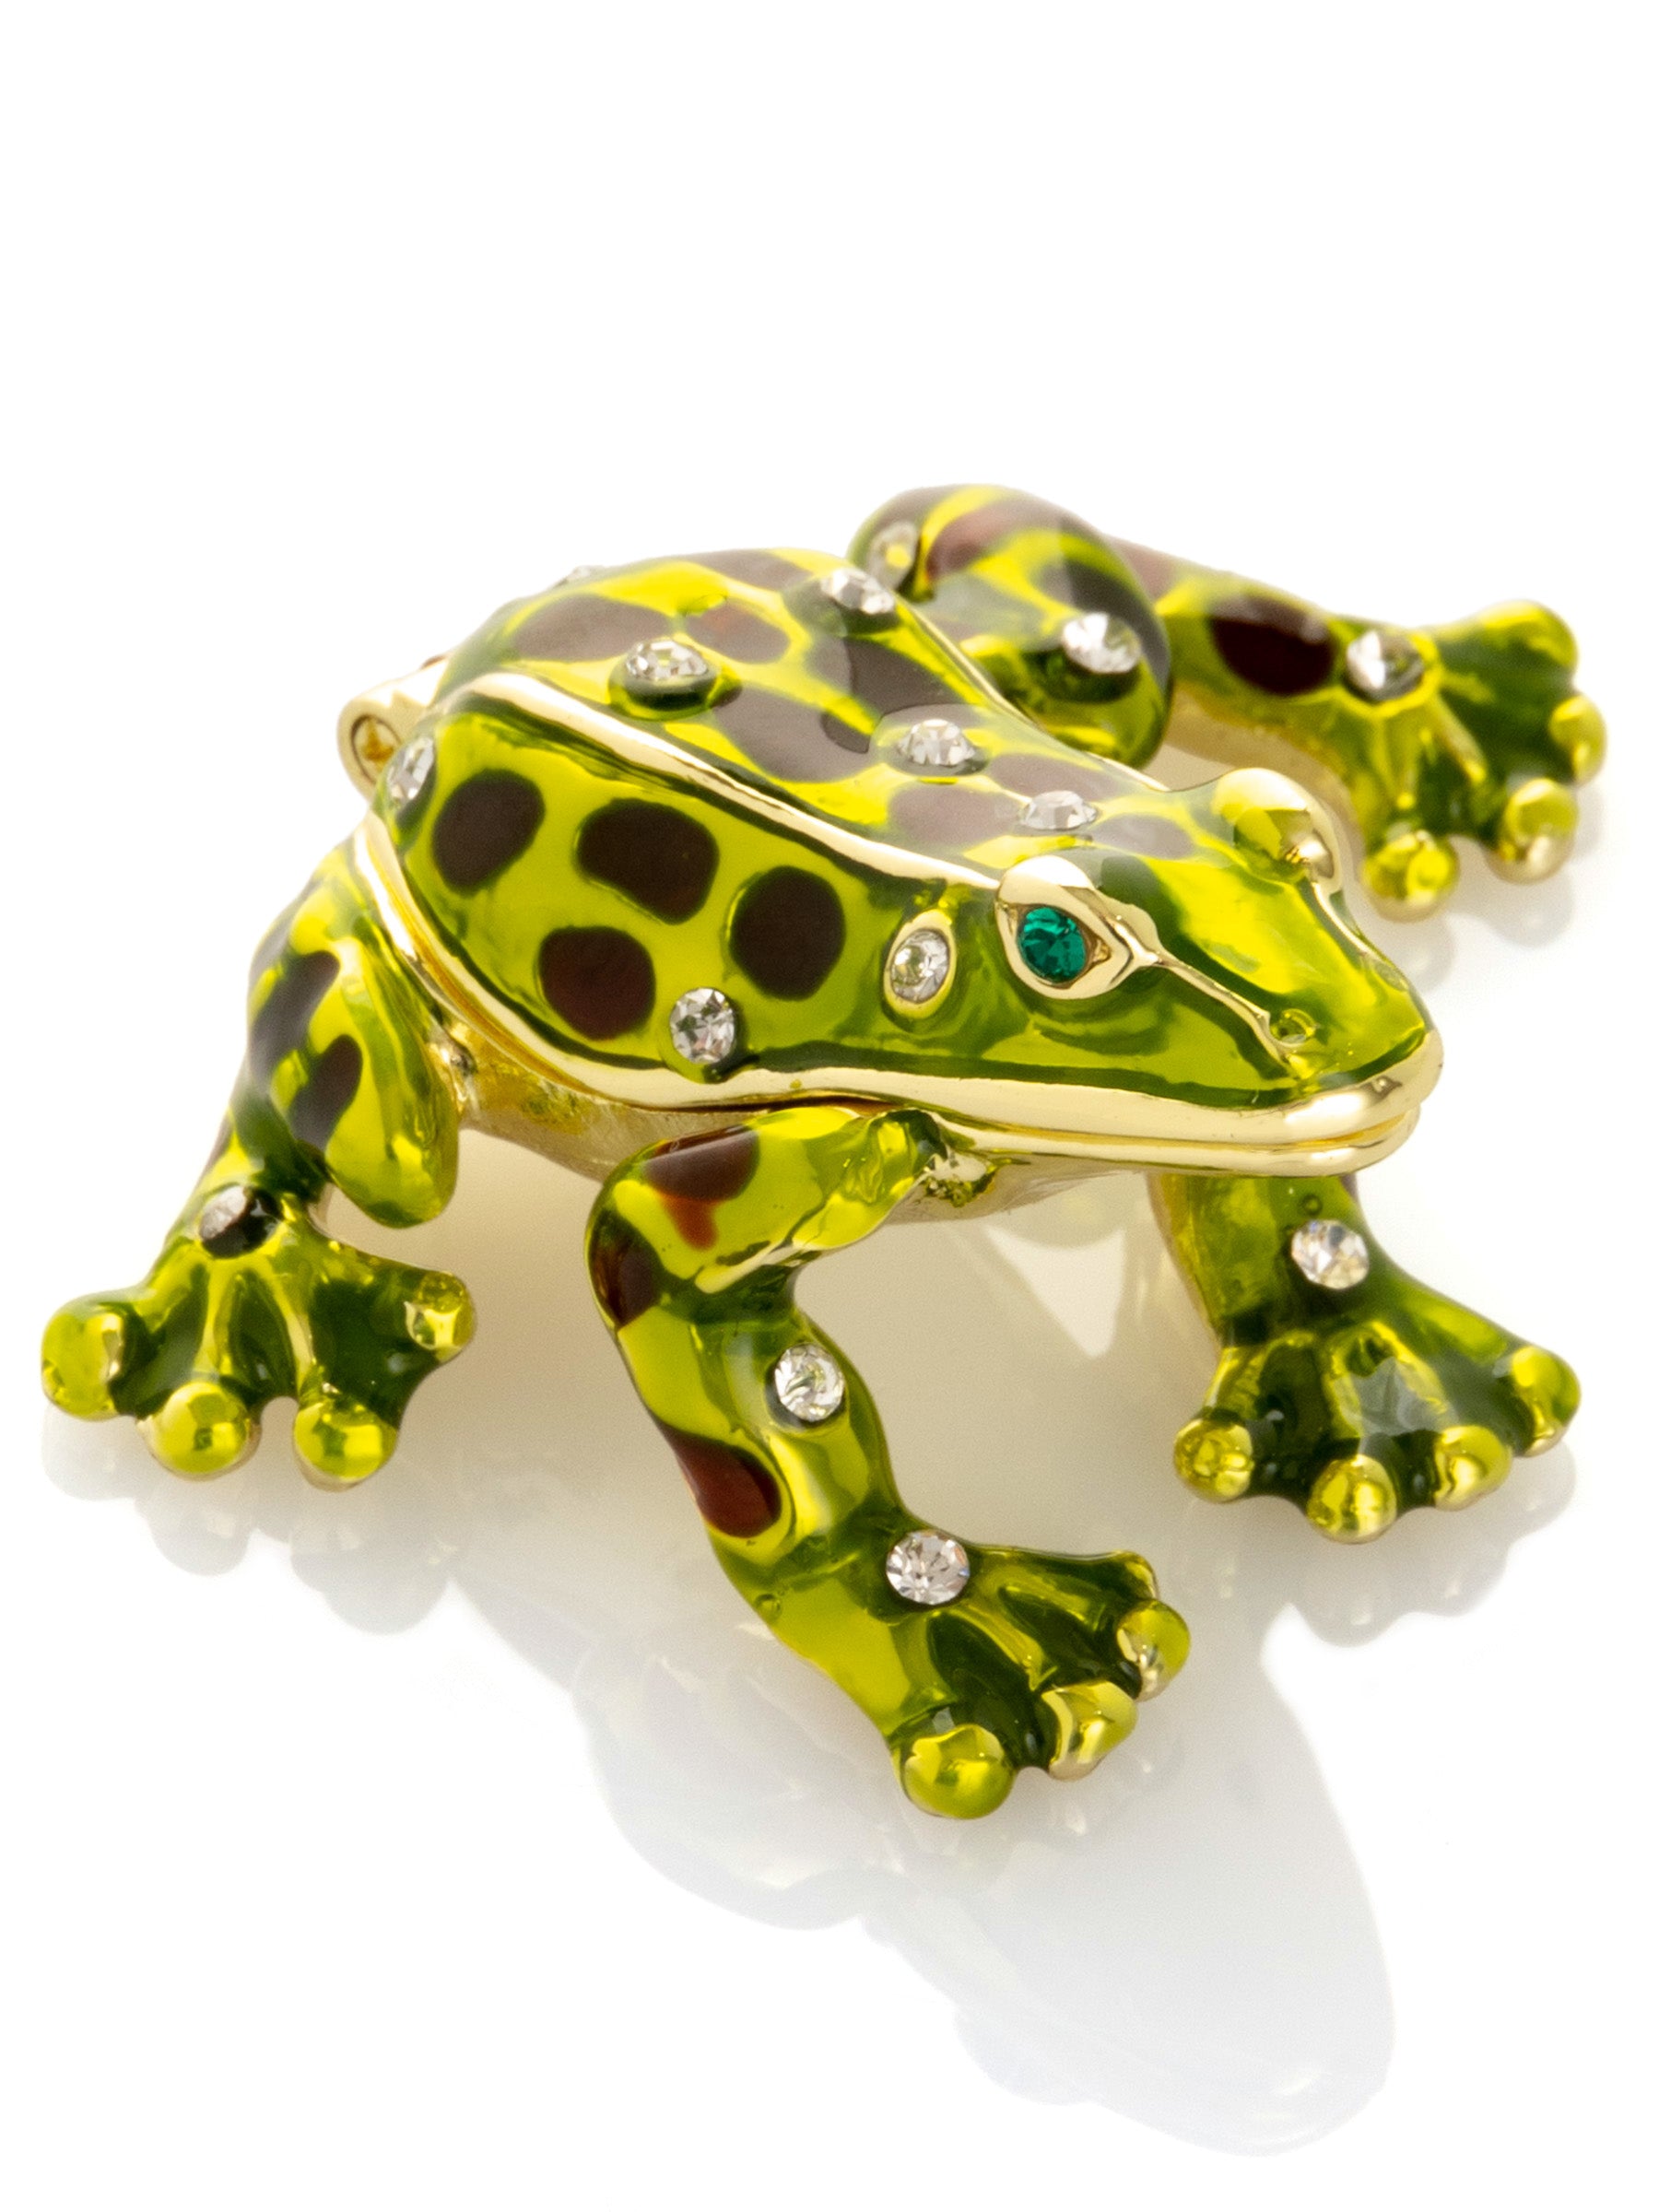 Green Black Spotted Frog